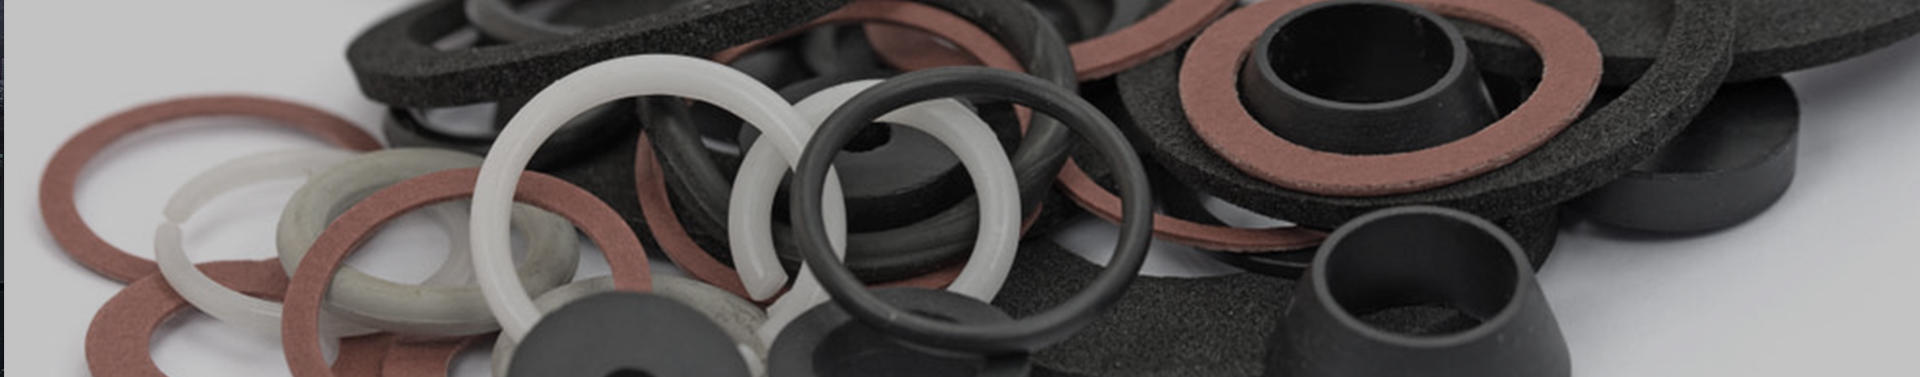 Nitrile Rubber Skeleton Oil Seals: The Superior Choice for Sealing Applications